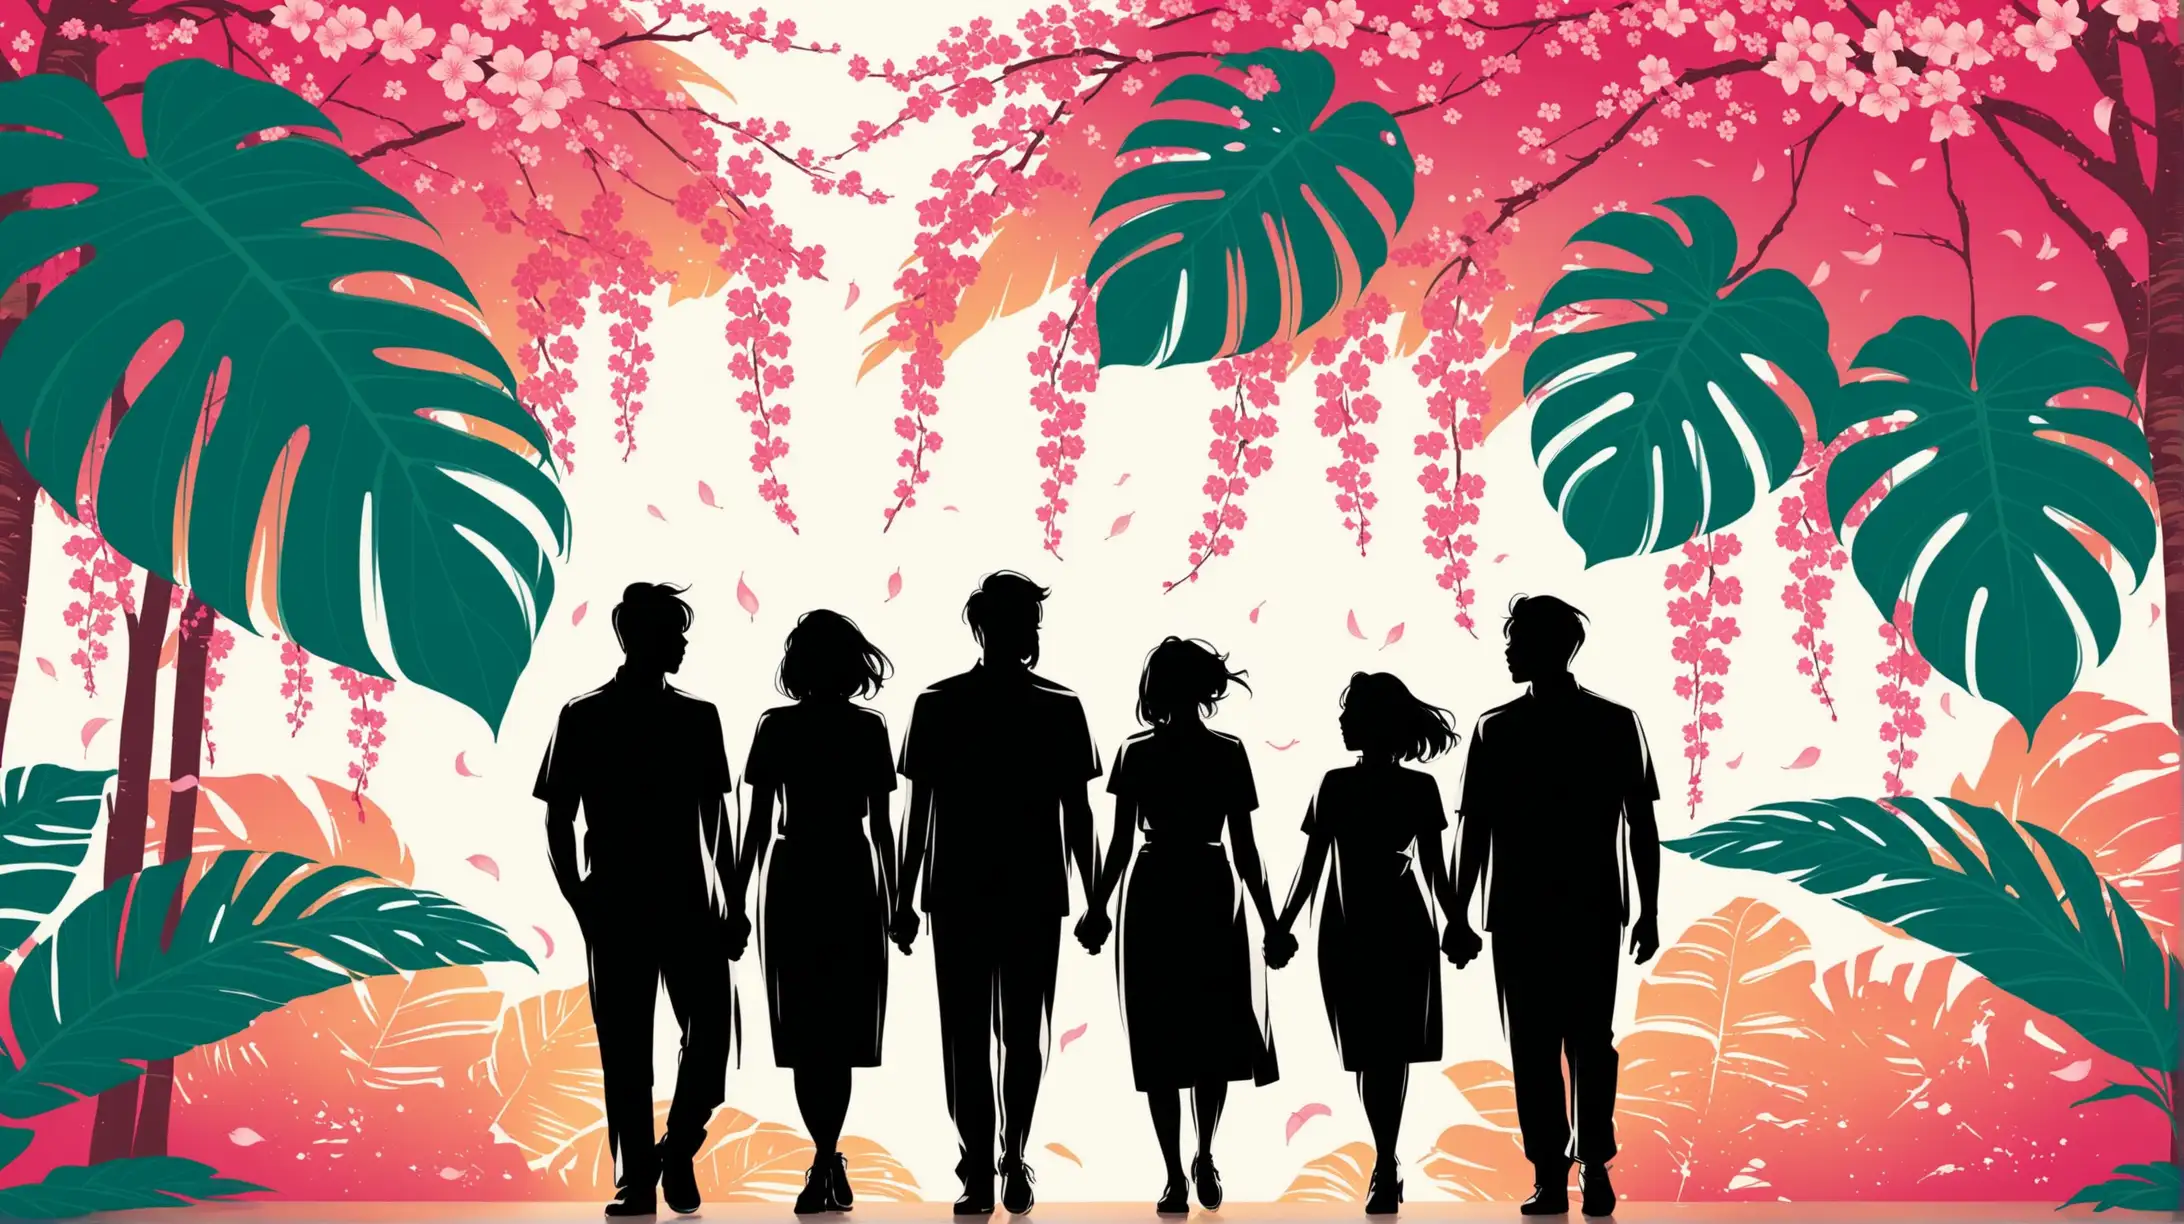 Create an image with Asian Americans men and women islander silhouettes, celebrating with a backdrop of monstera plants and cherry blossoms. There shouldn't be too much detail but should have vibrant colors. 